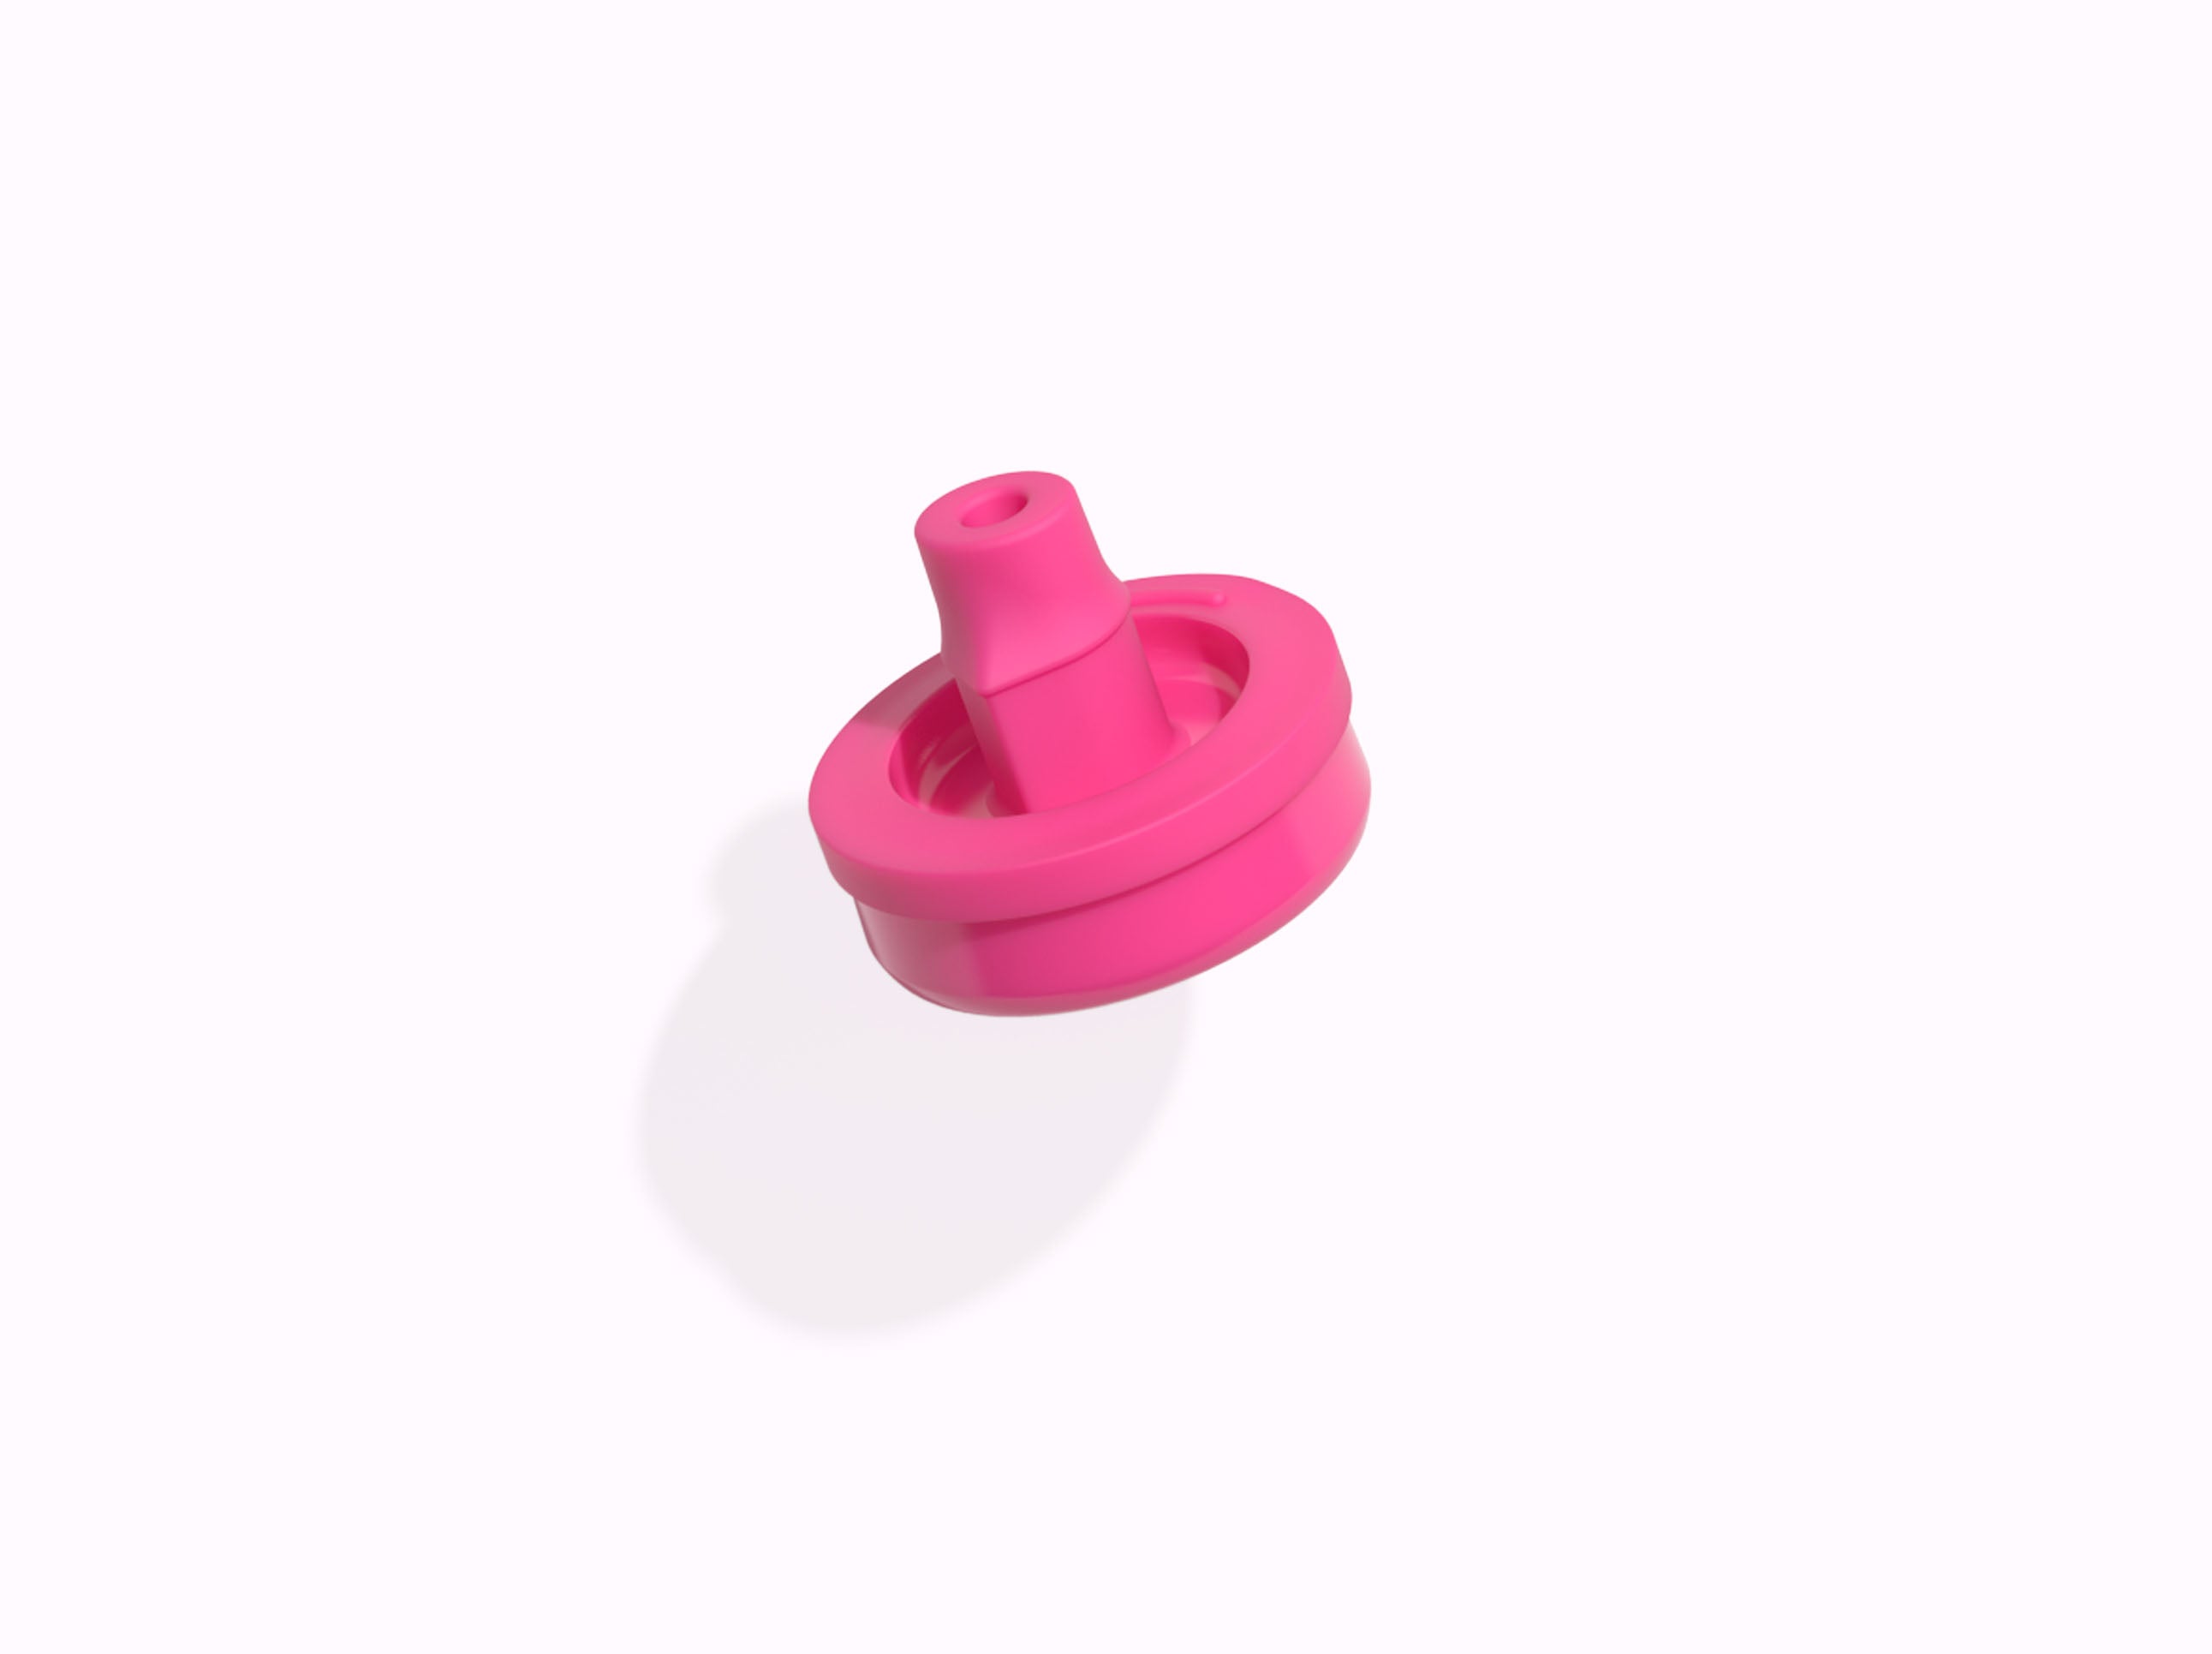 https://cdn.shopify.com/s/files/1/0635/3610/3657/products/AirUp_Accessories_Mouthpiece_HotPink.jpg?v=1675889076